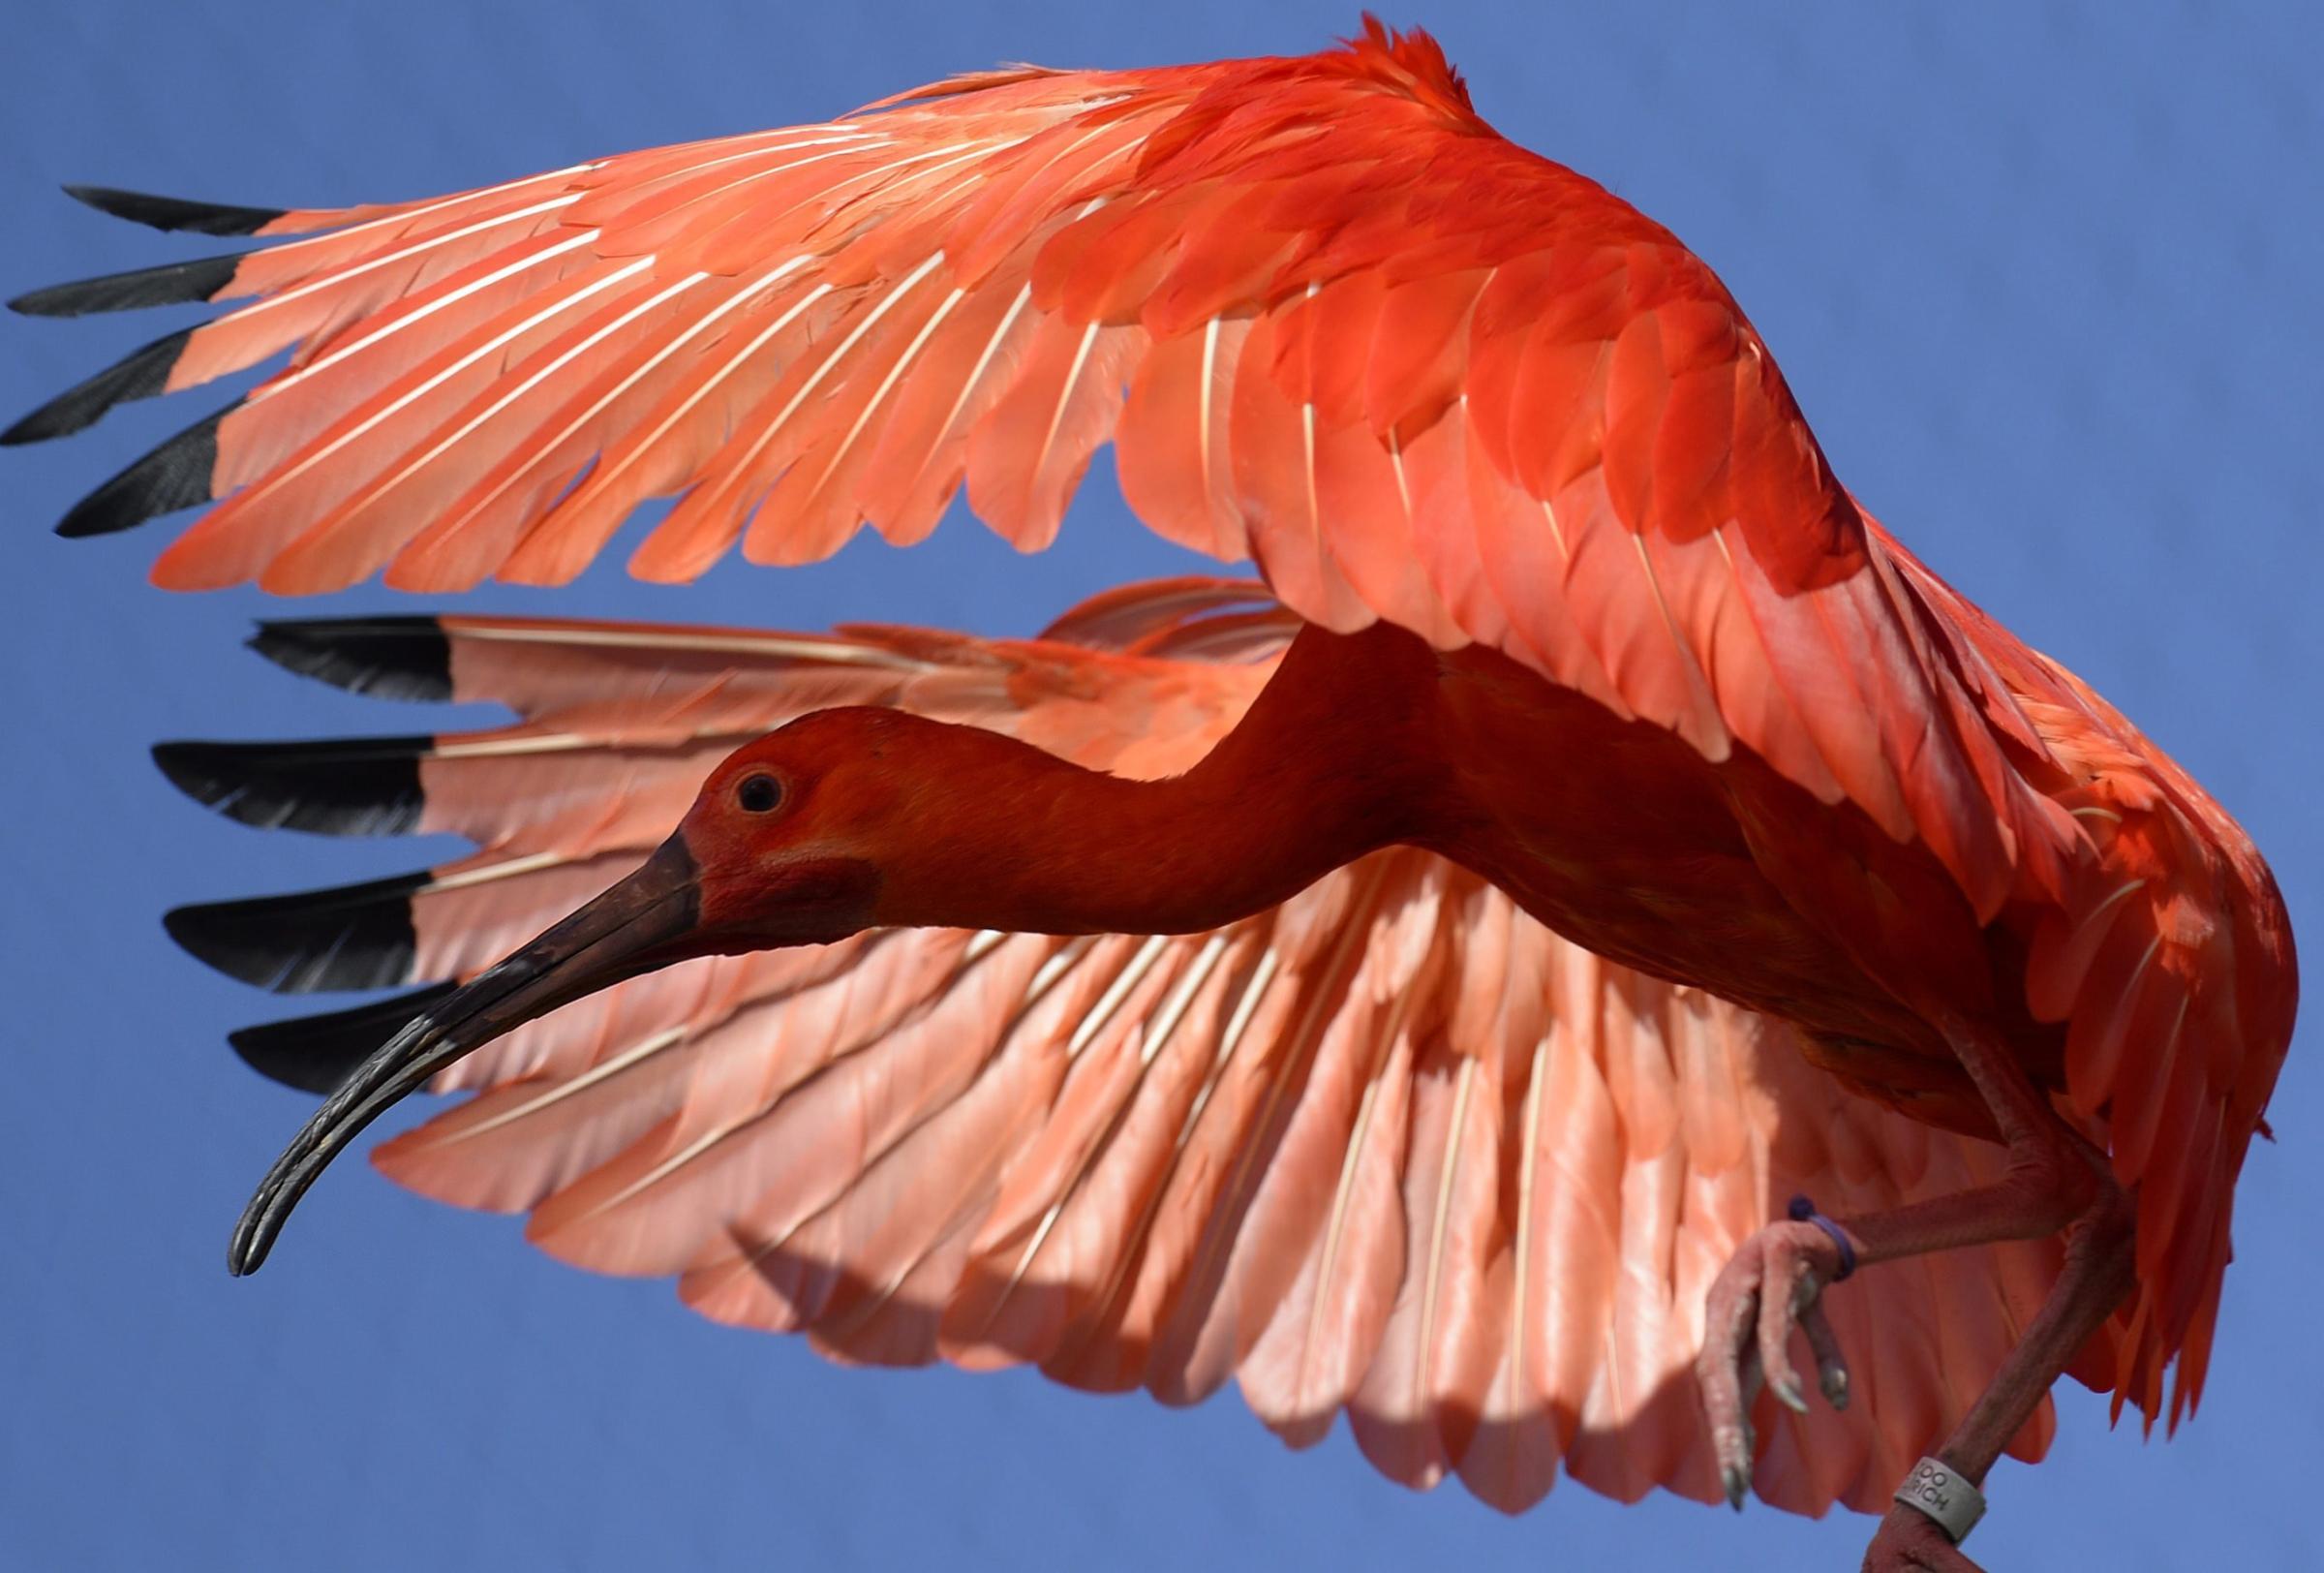 A scarlet ibis at the  zoo in Zurich